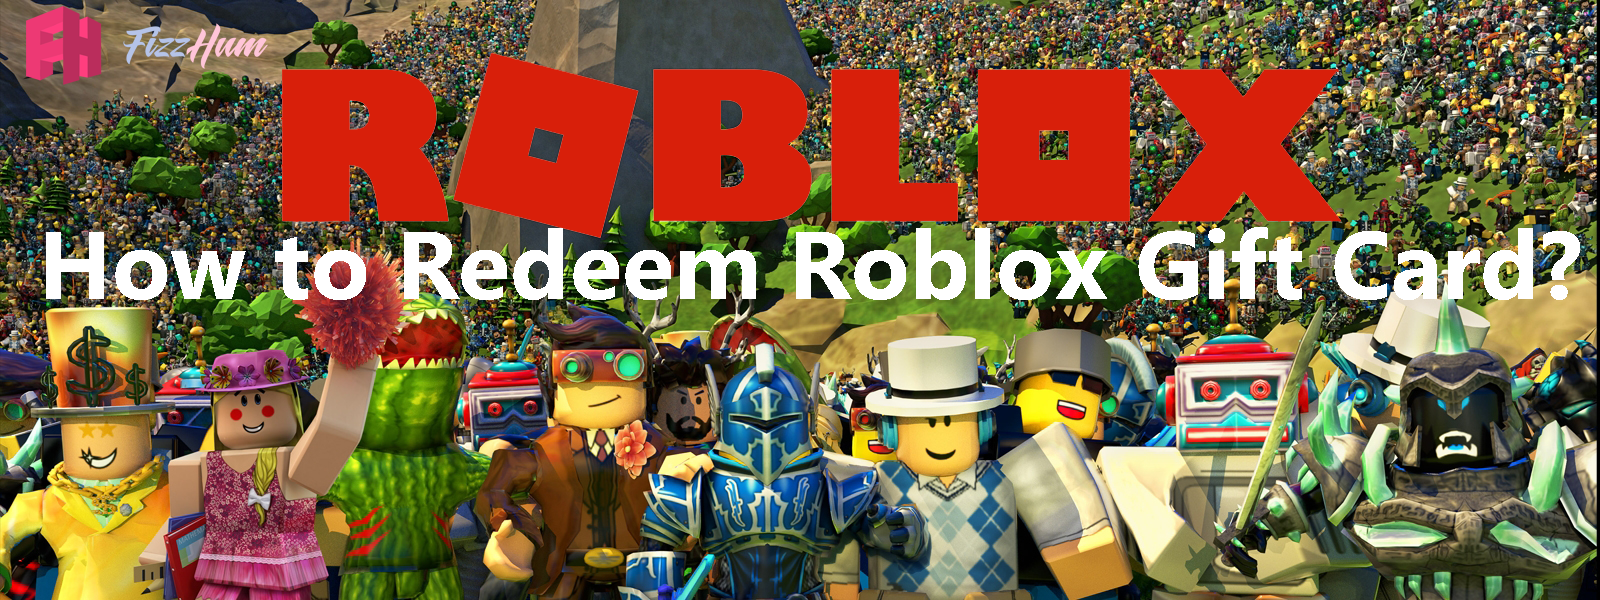 How To Redeem Roblox Gift Card Step By Step 2021 Fizzhum Com - where do i get roblox gift cards